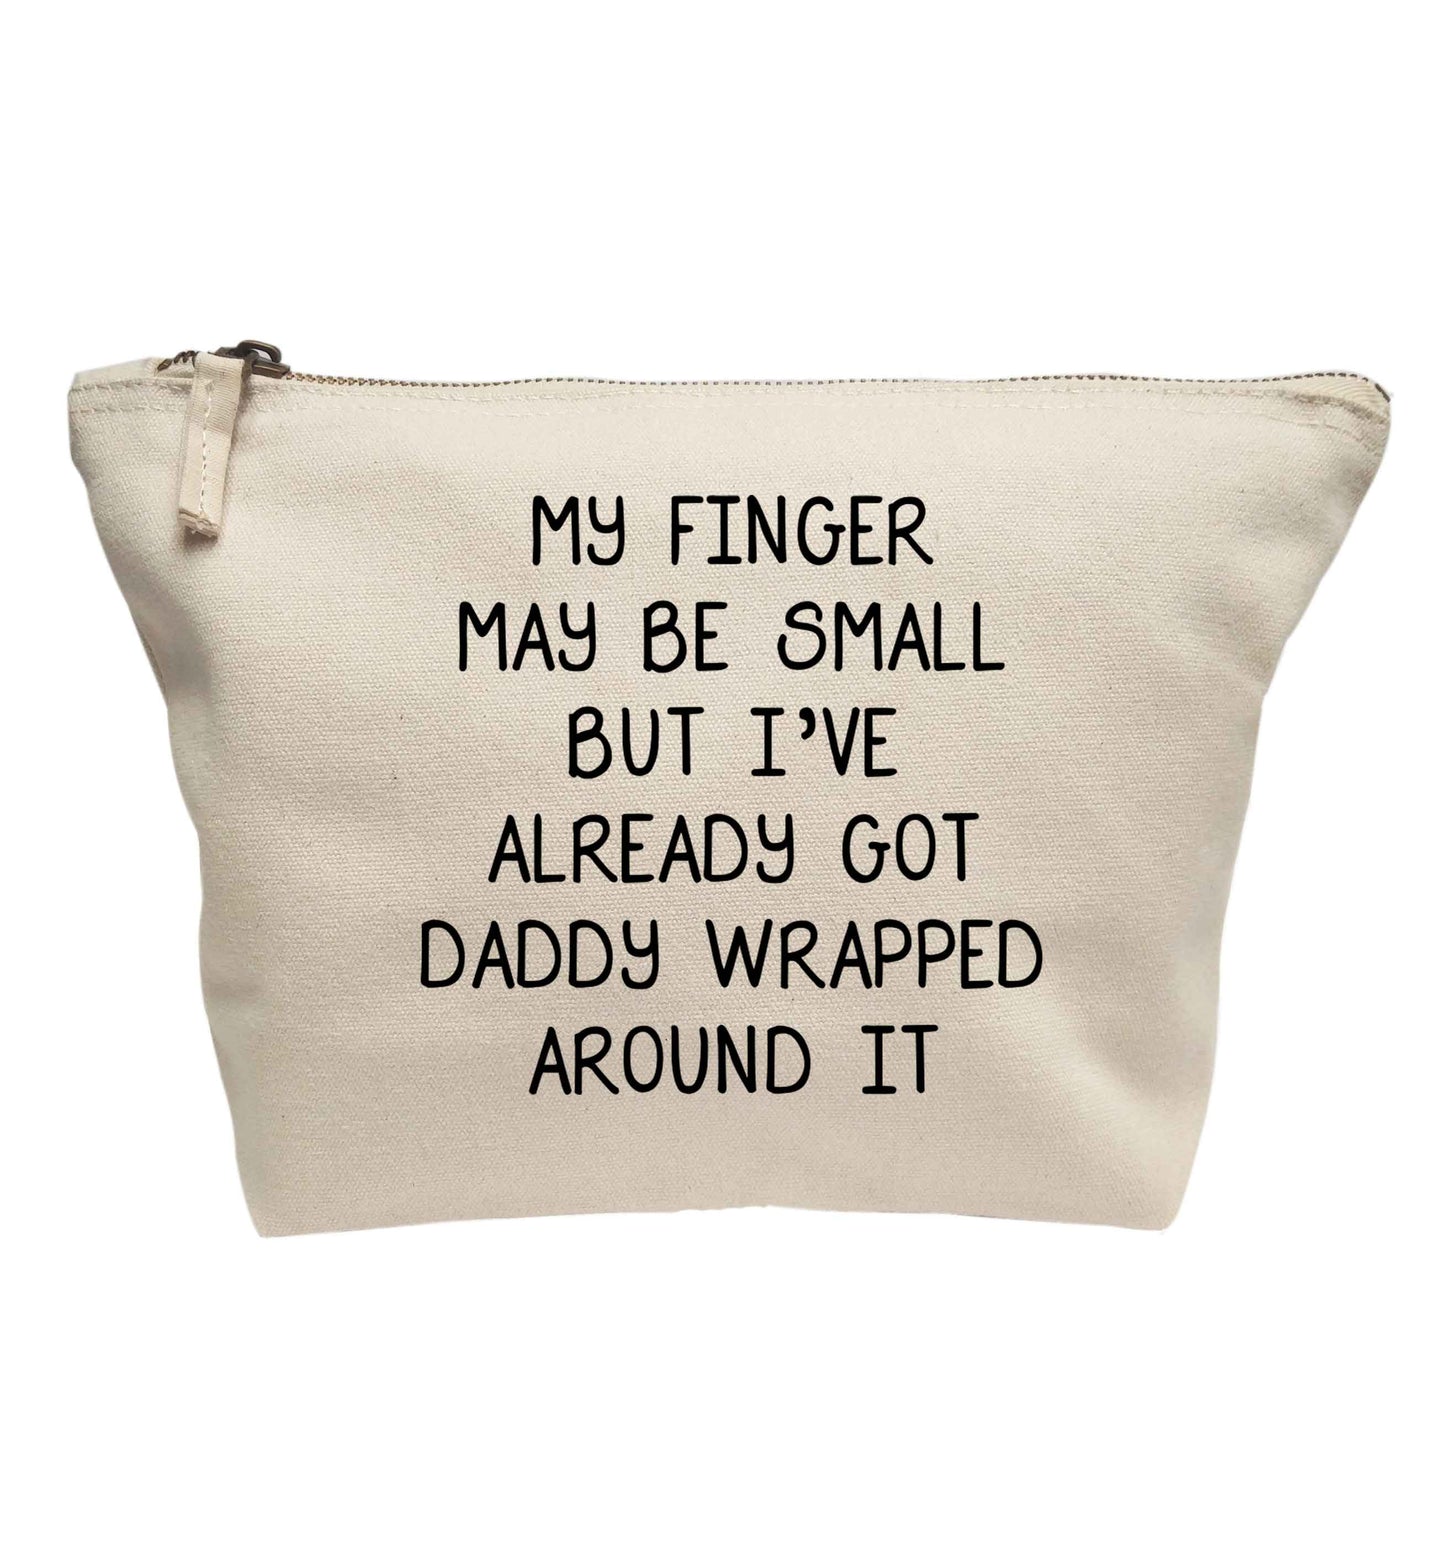 My finger may be small but I've already got daddy wrapped around it | Makeup / wash bag